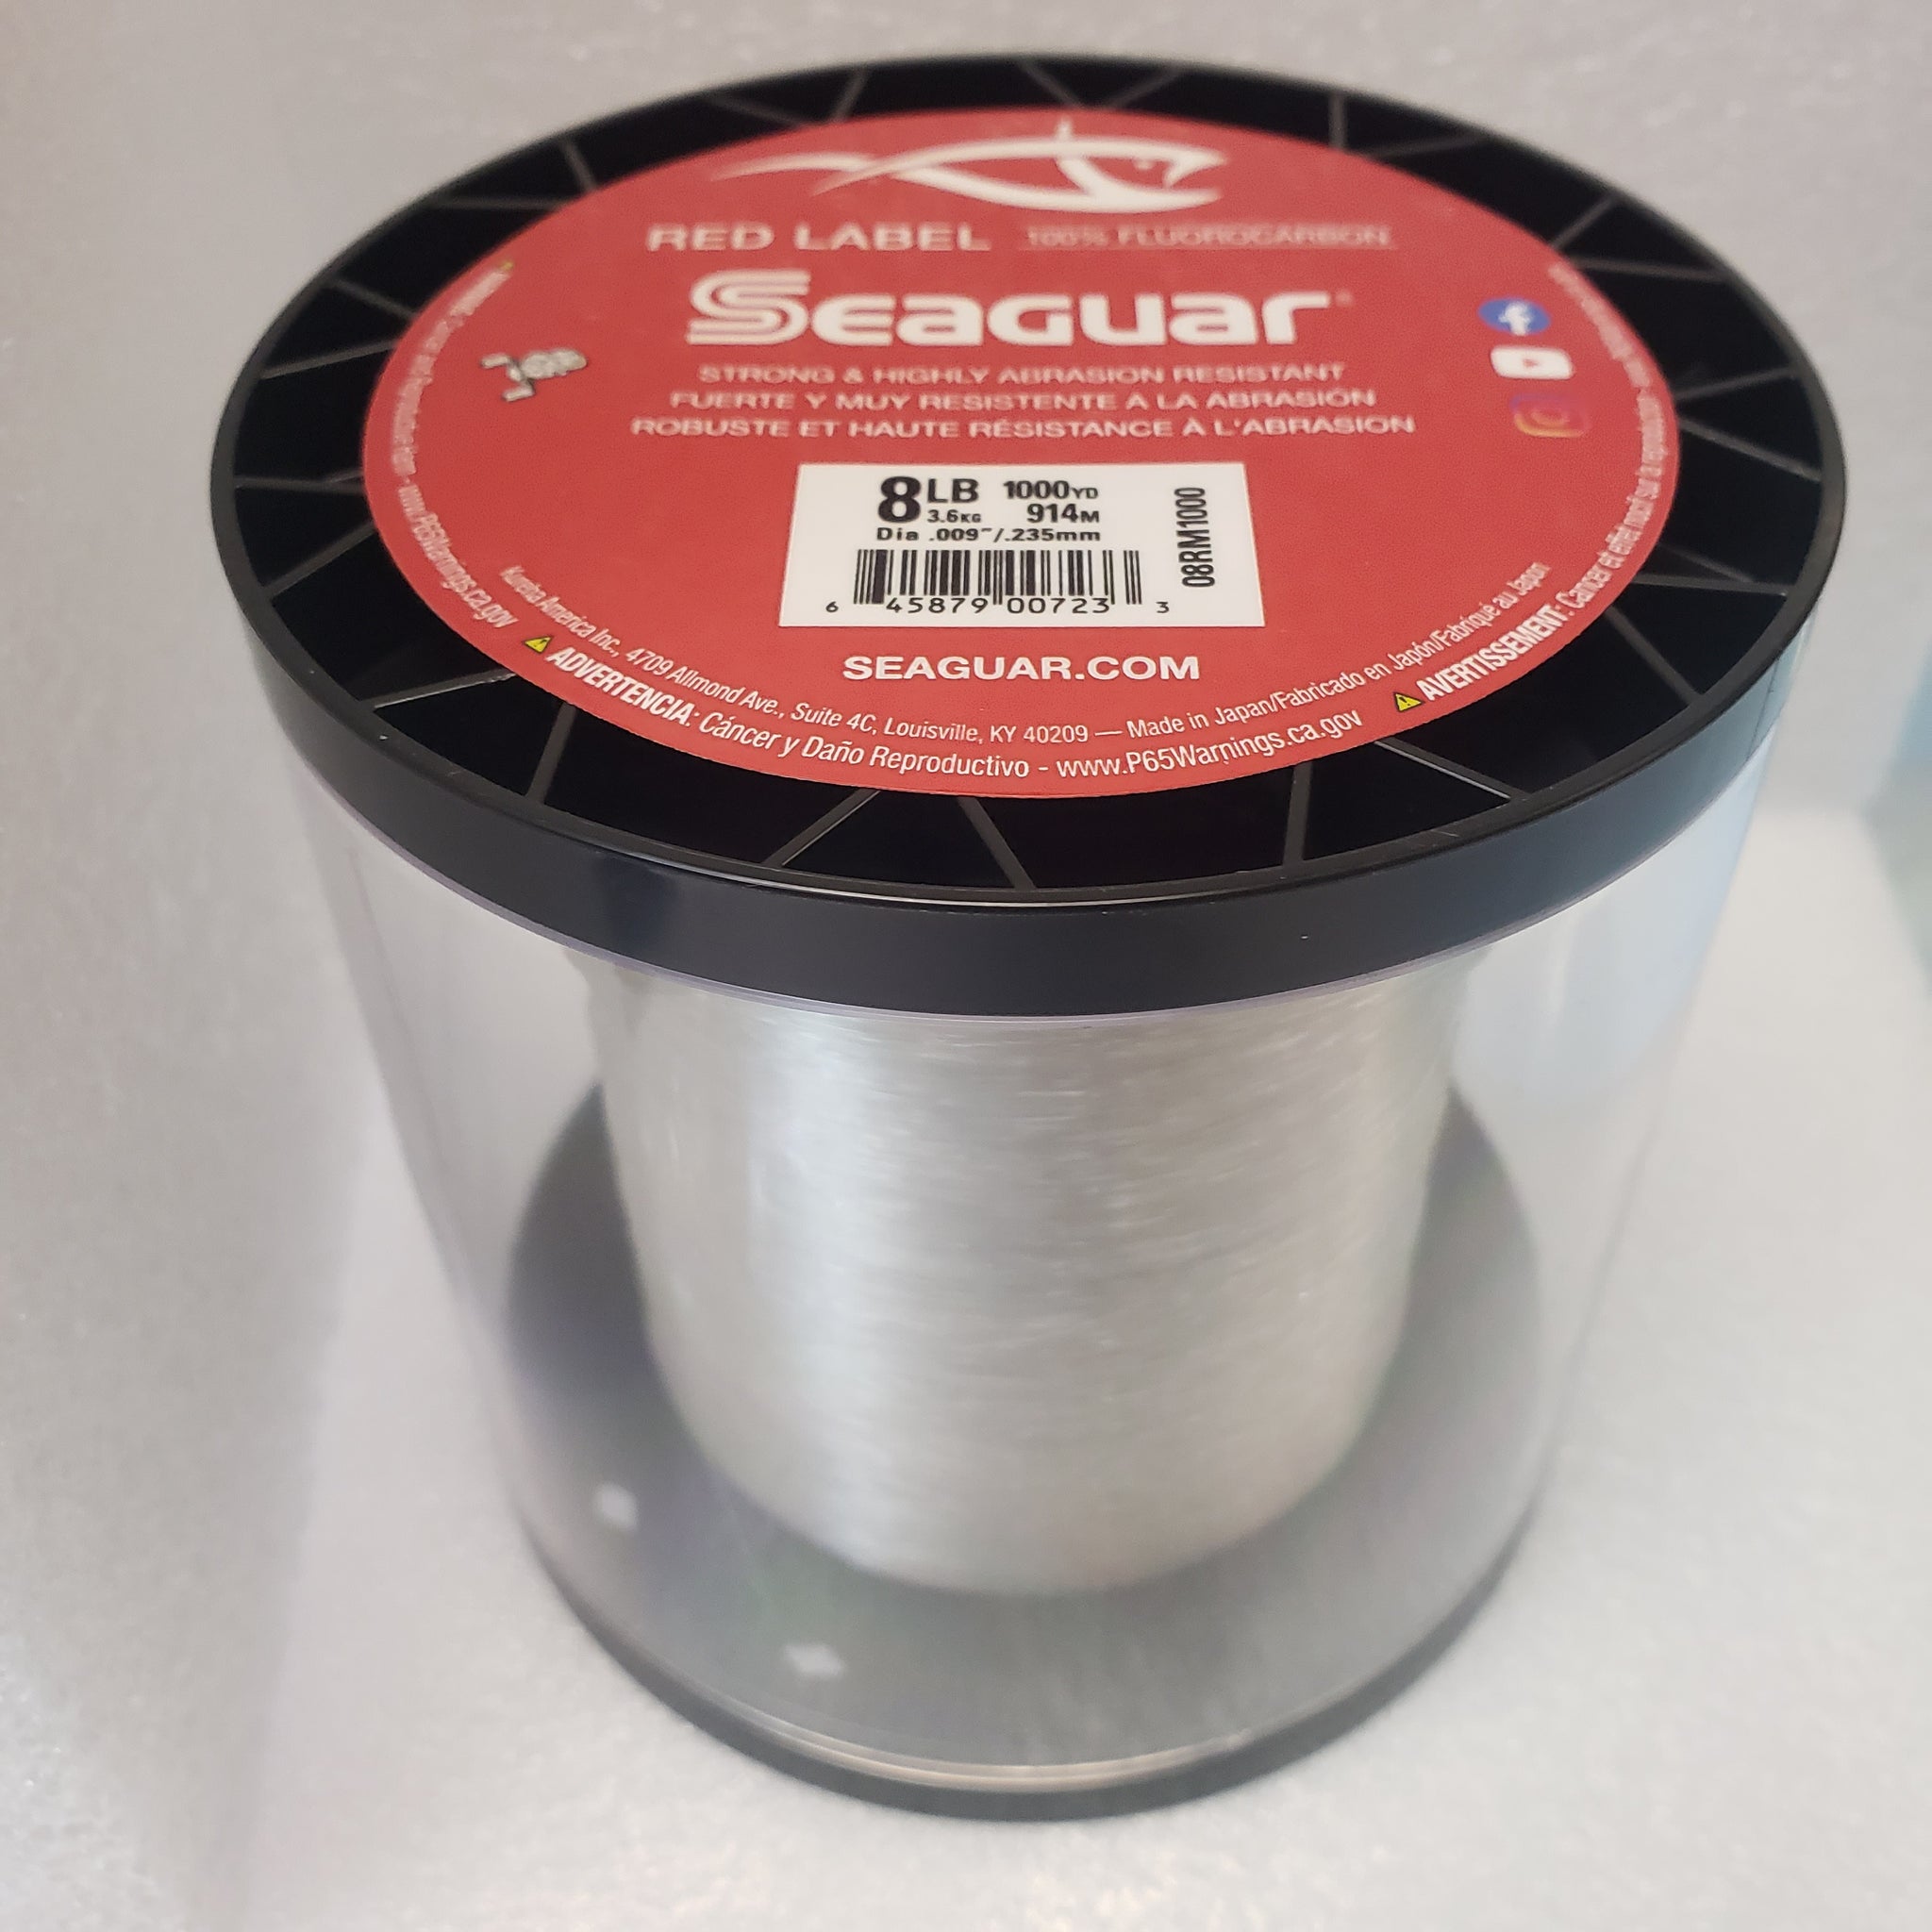 SEAGUAR RED LABEL 100% FLUOROCARBON Fishing Line 1000 YARDS PICK YOUR SIZE!